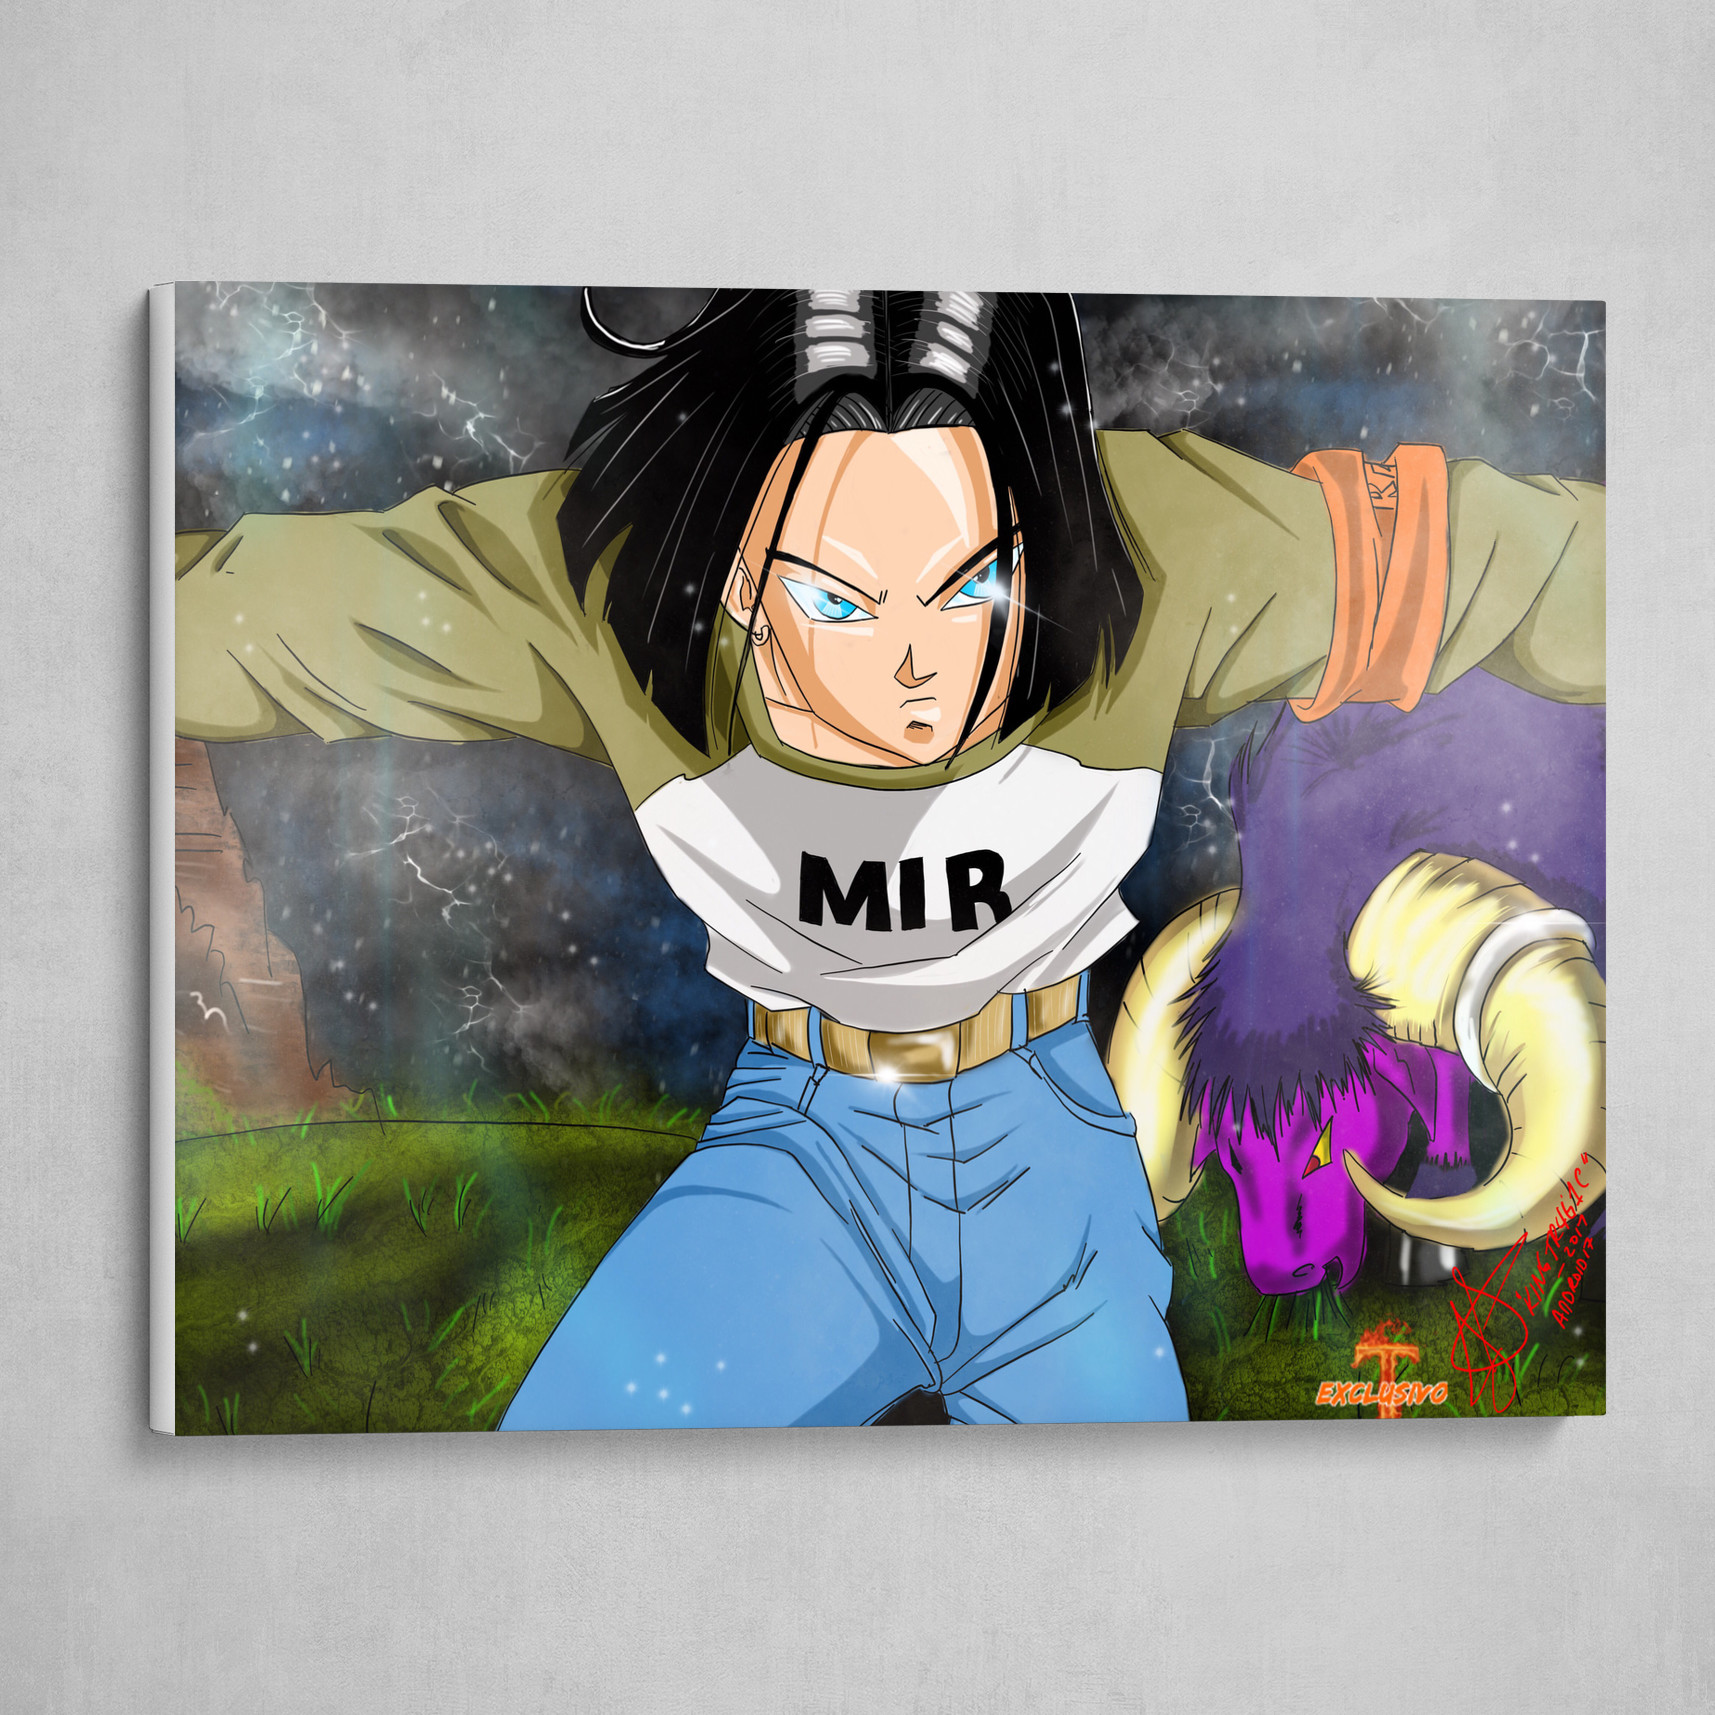 Android 17 from Dragon Ball Super | speed drawing - YouTube